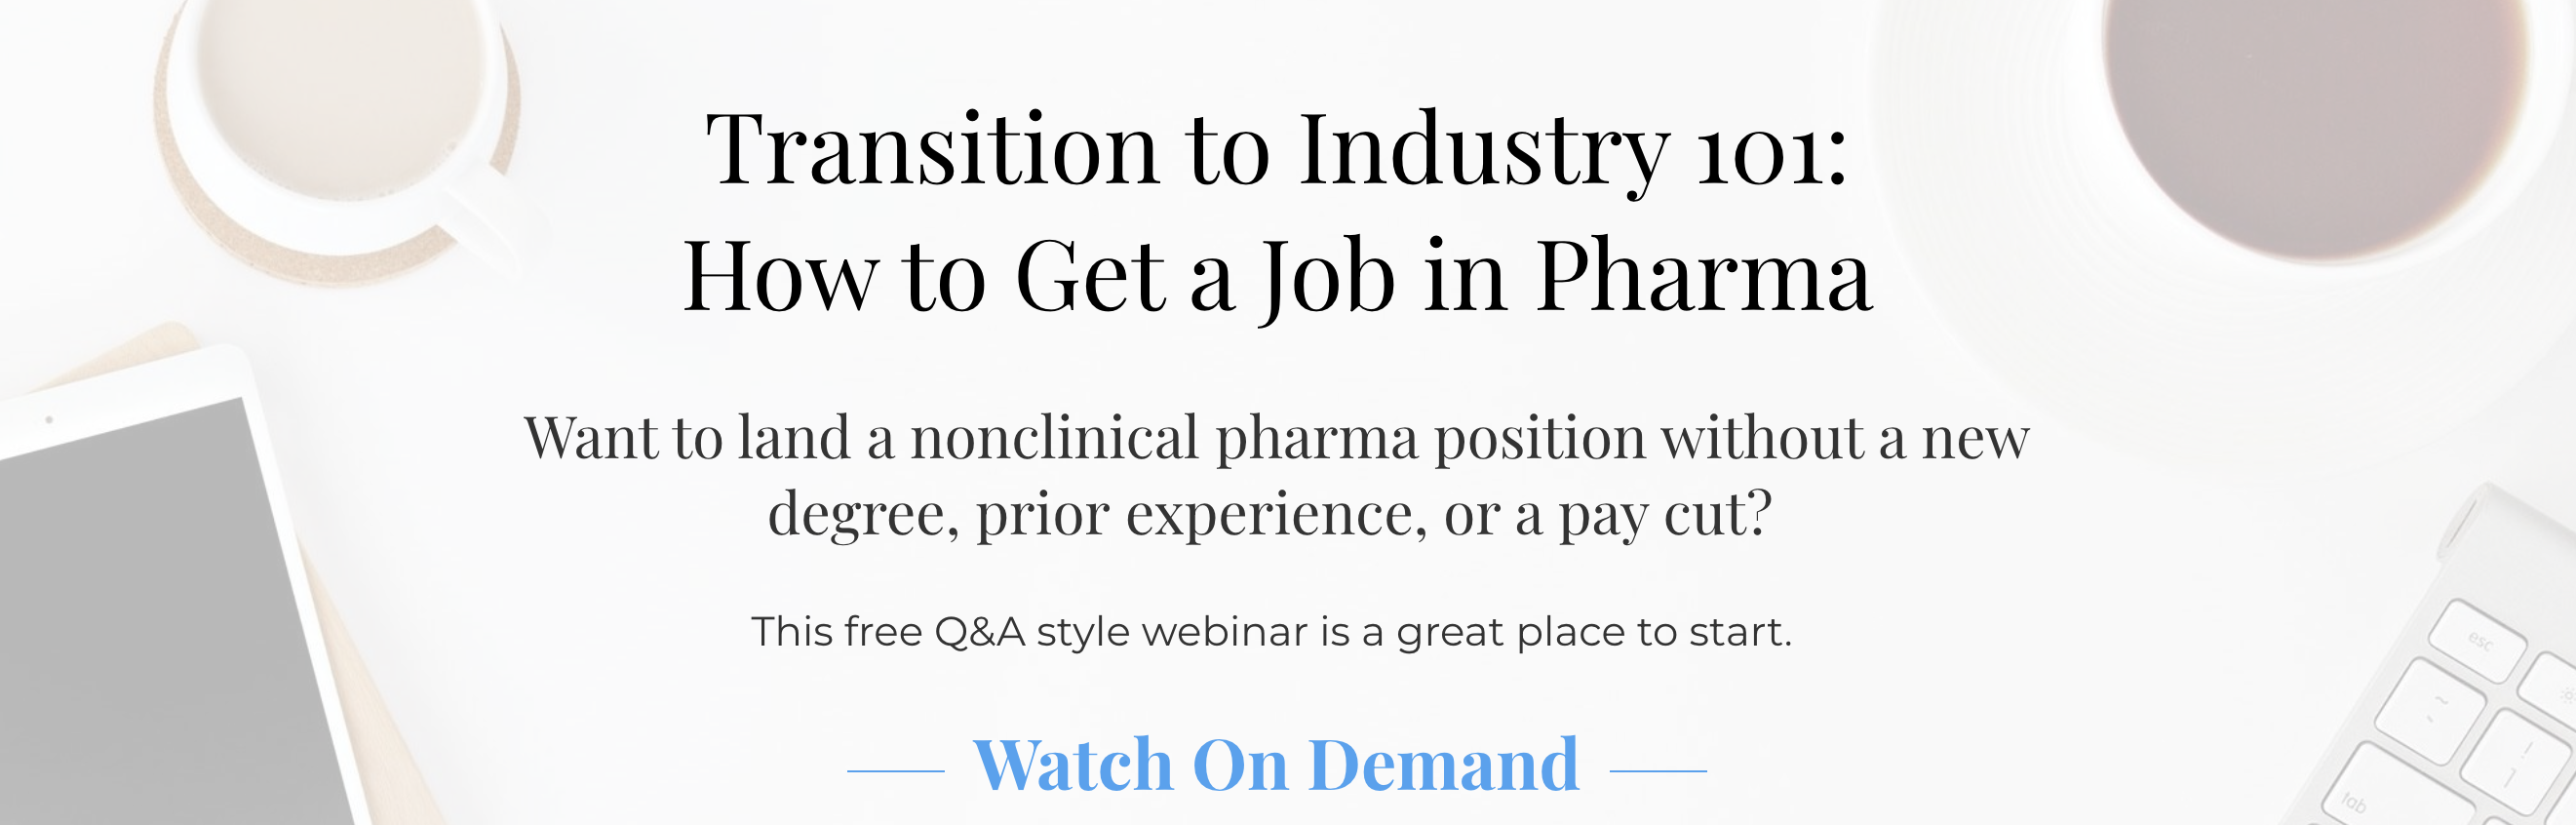 Transition to Industry 101: How to Get a Job in Pharma